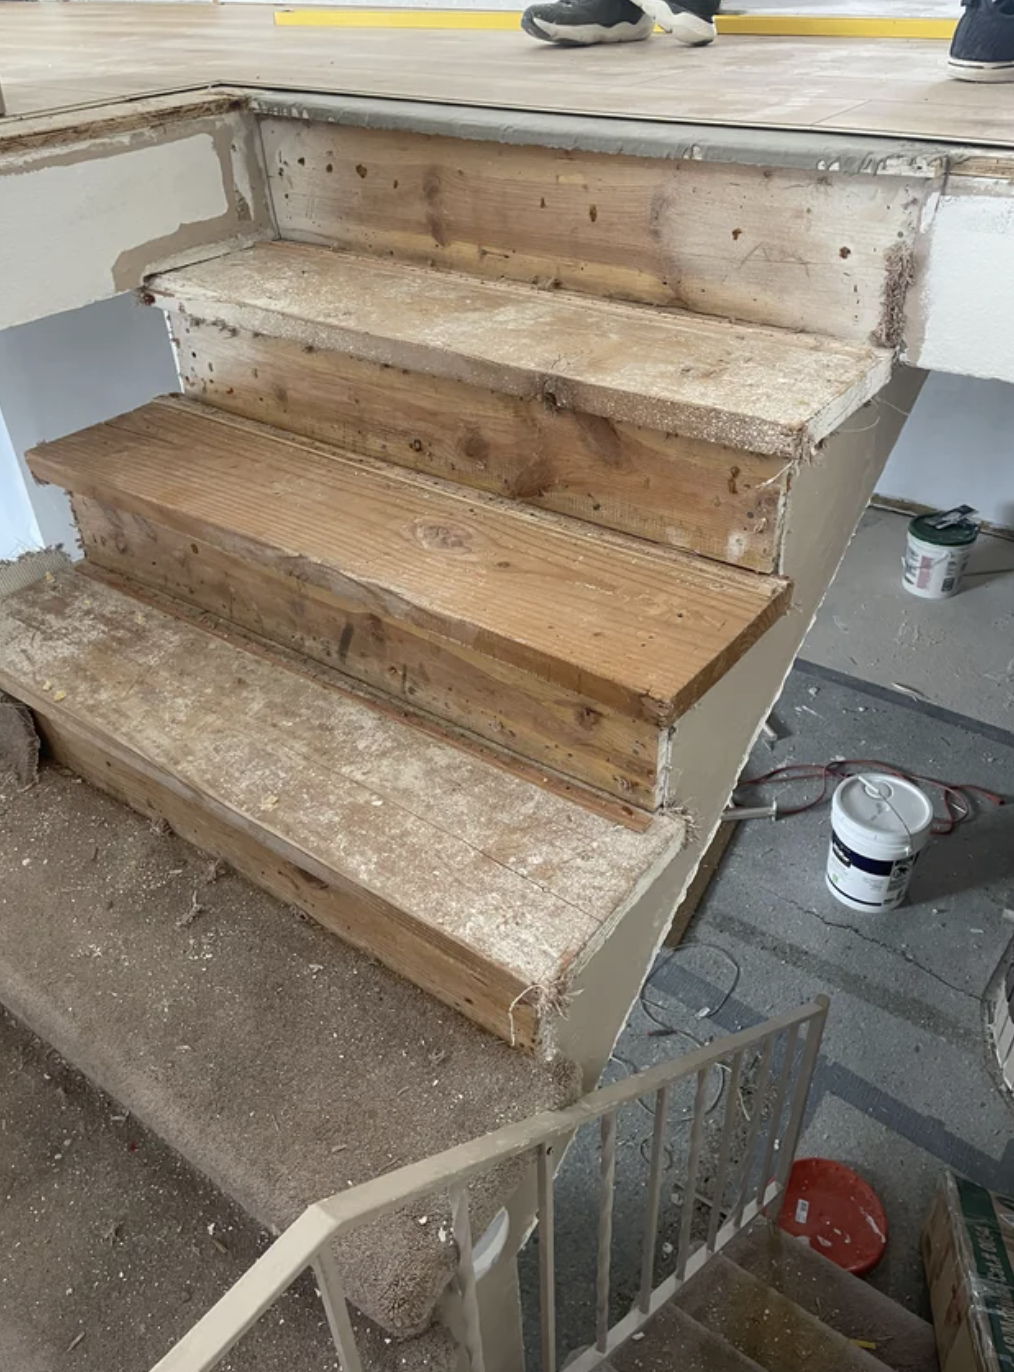 A set of wooden stairs under construction with removed treads, revealing risers and stringers